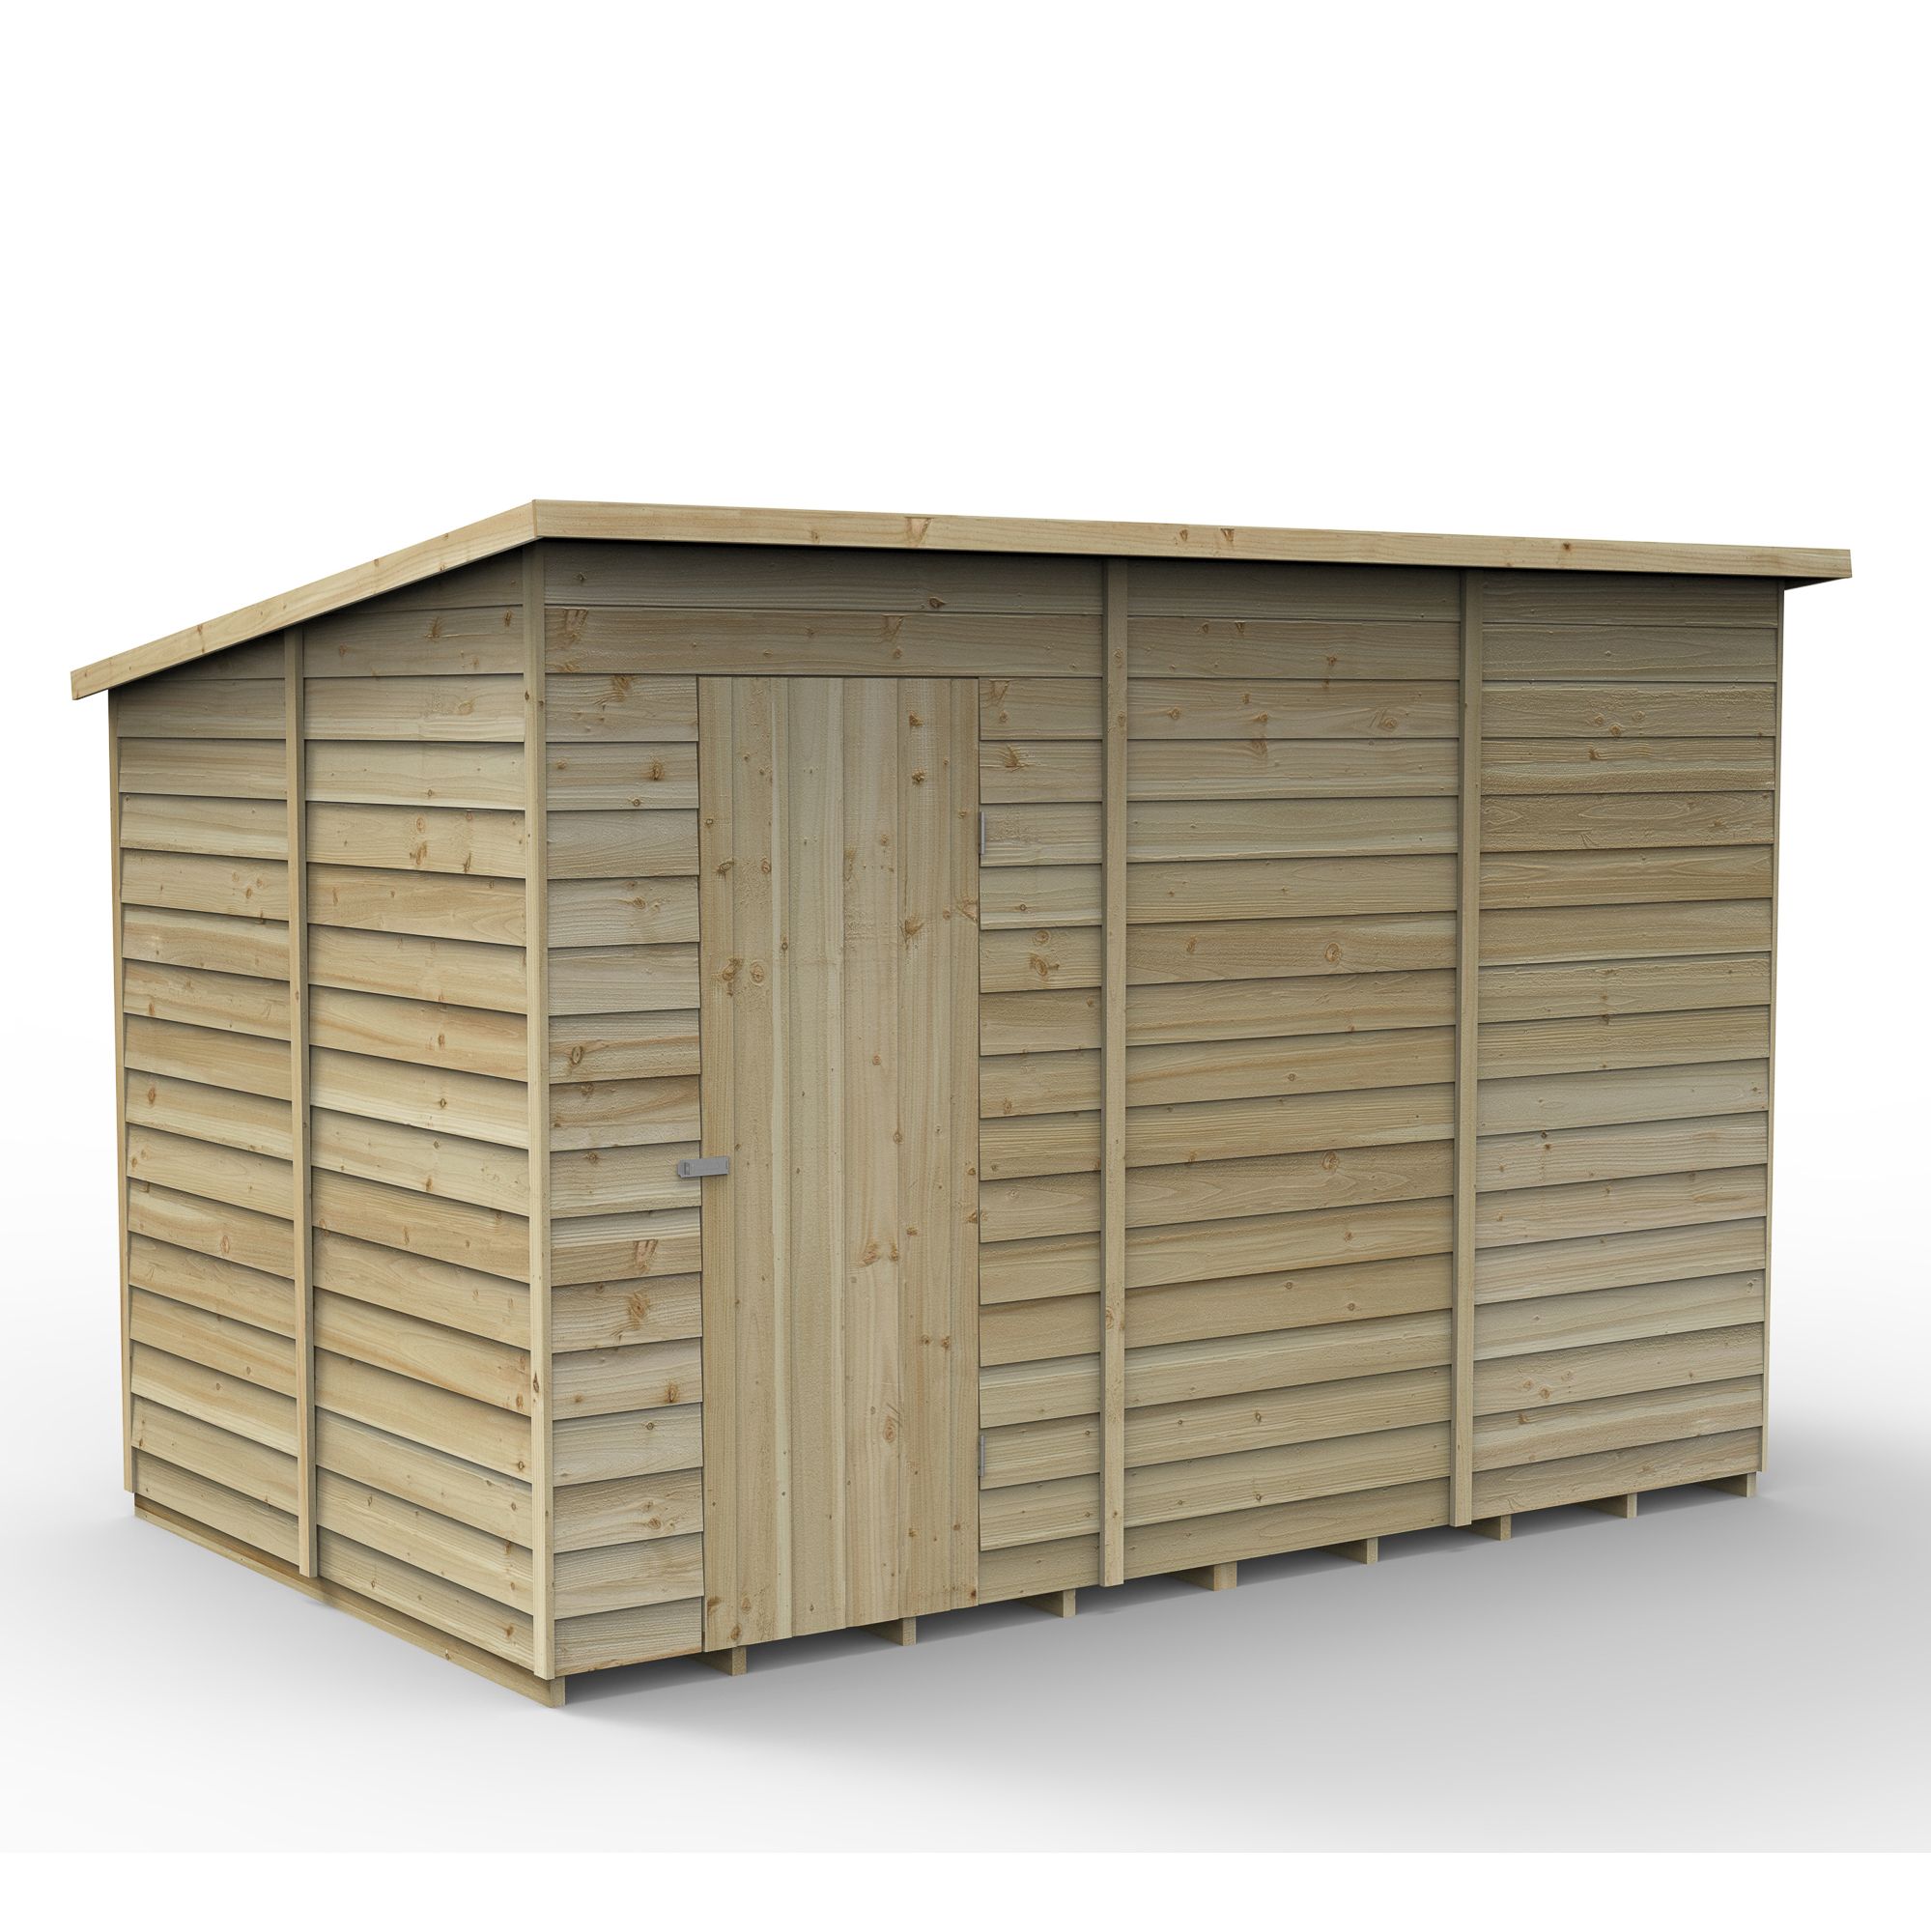 Forest Garden Overlap 10x6 ft Pent Wooden Shed with floor - Assembly service included